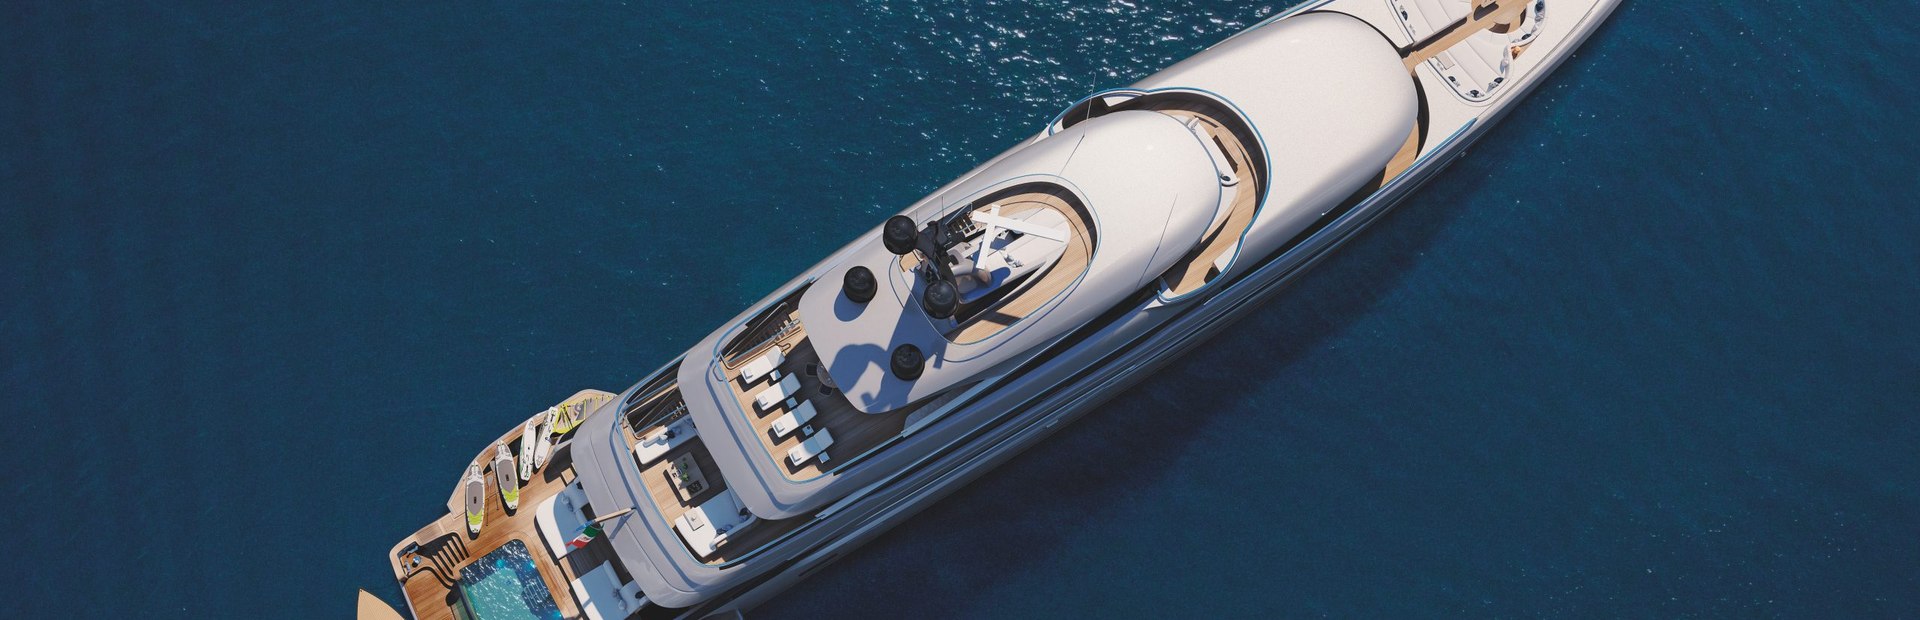 B.Now 66M Oasis Yacht